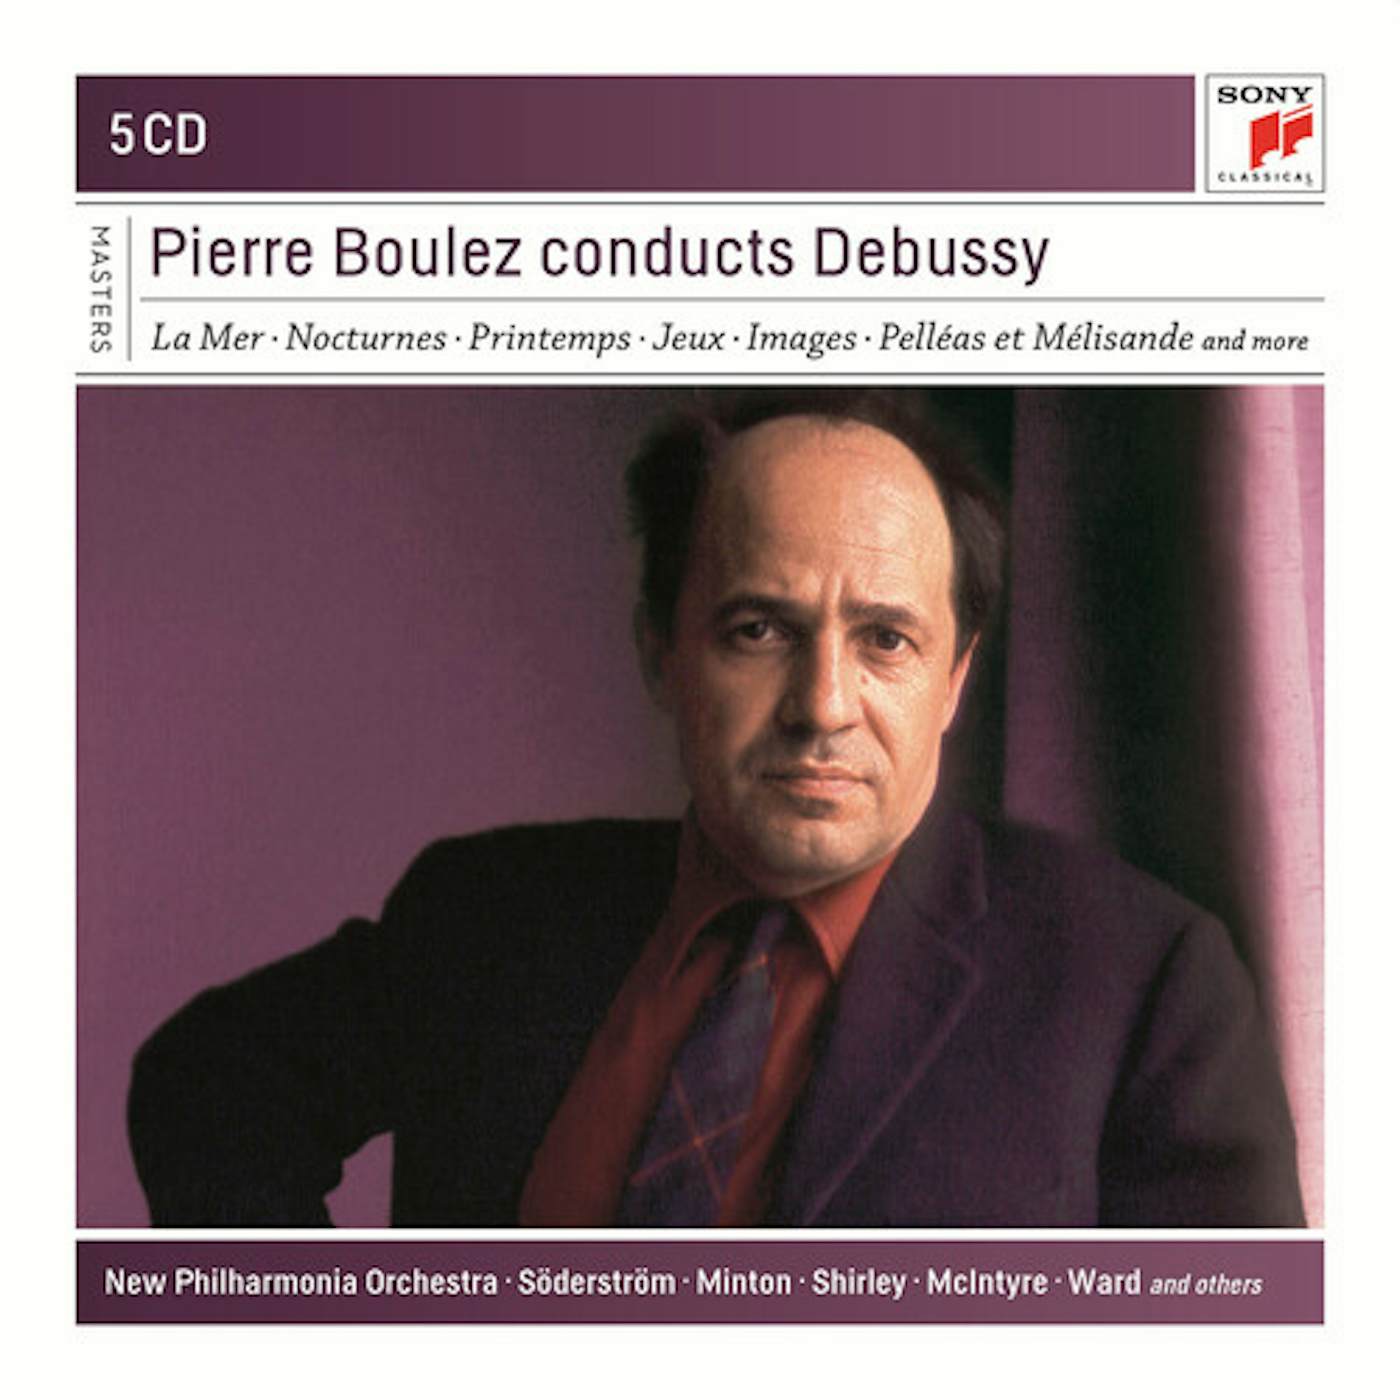 Pierre Boulez CONDUCTS DEBUSSY CD